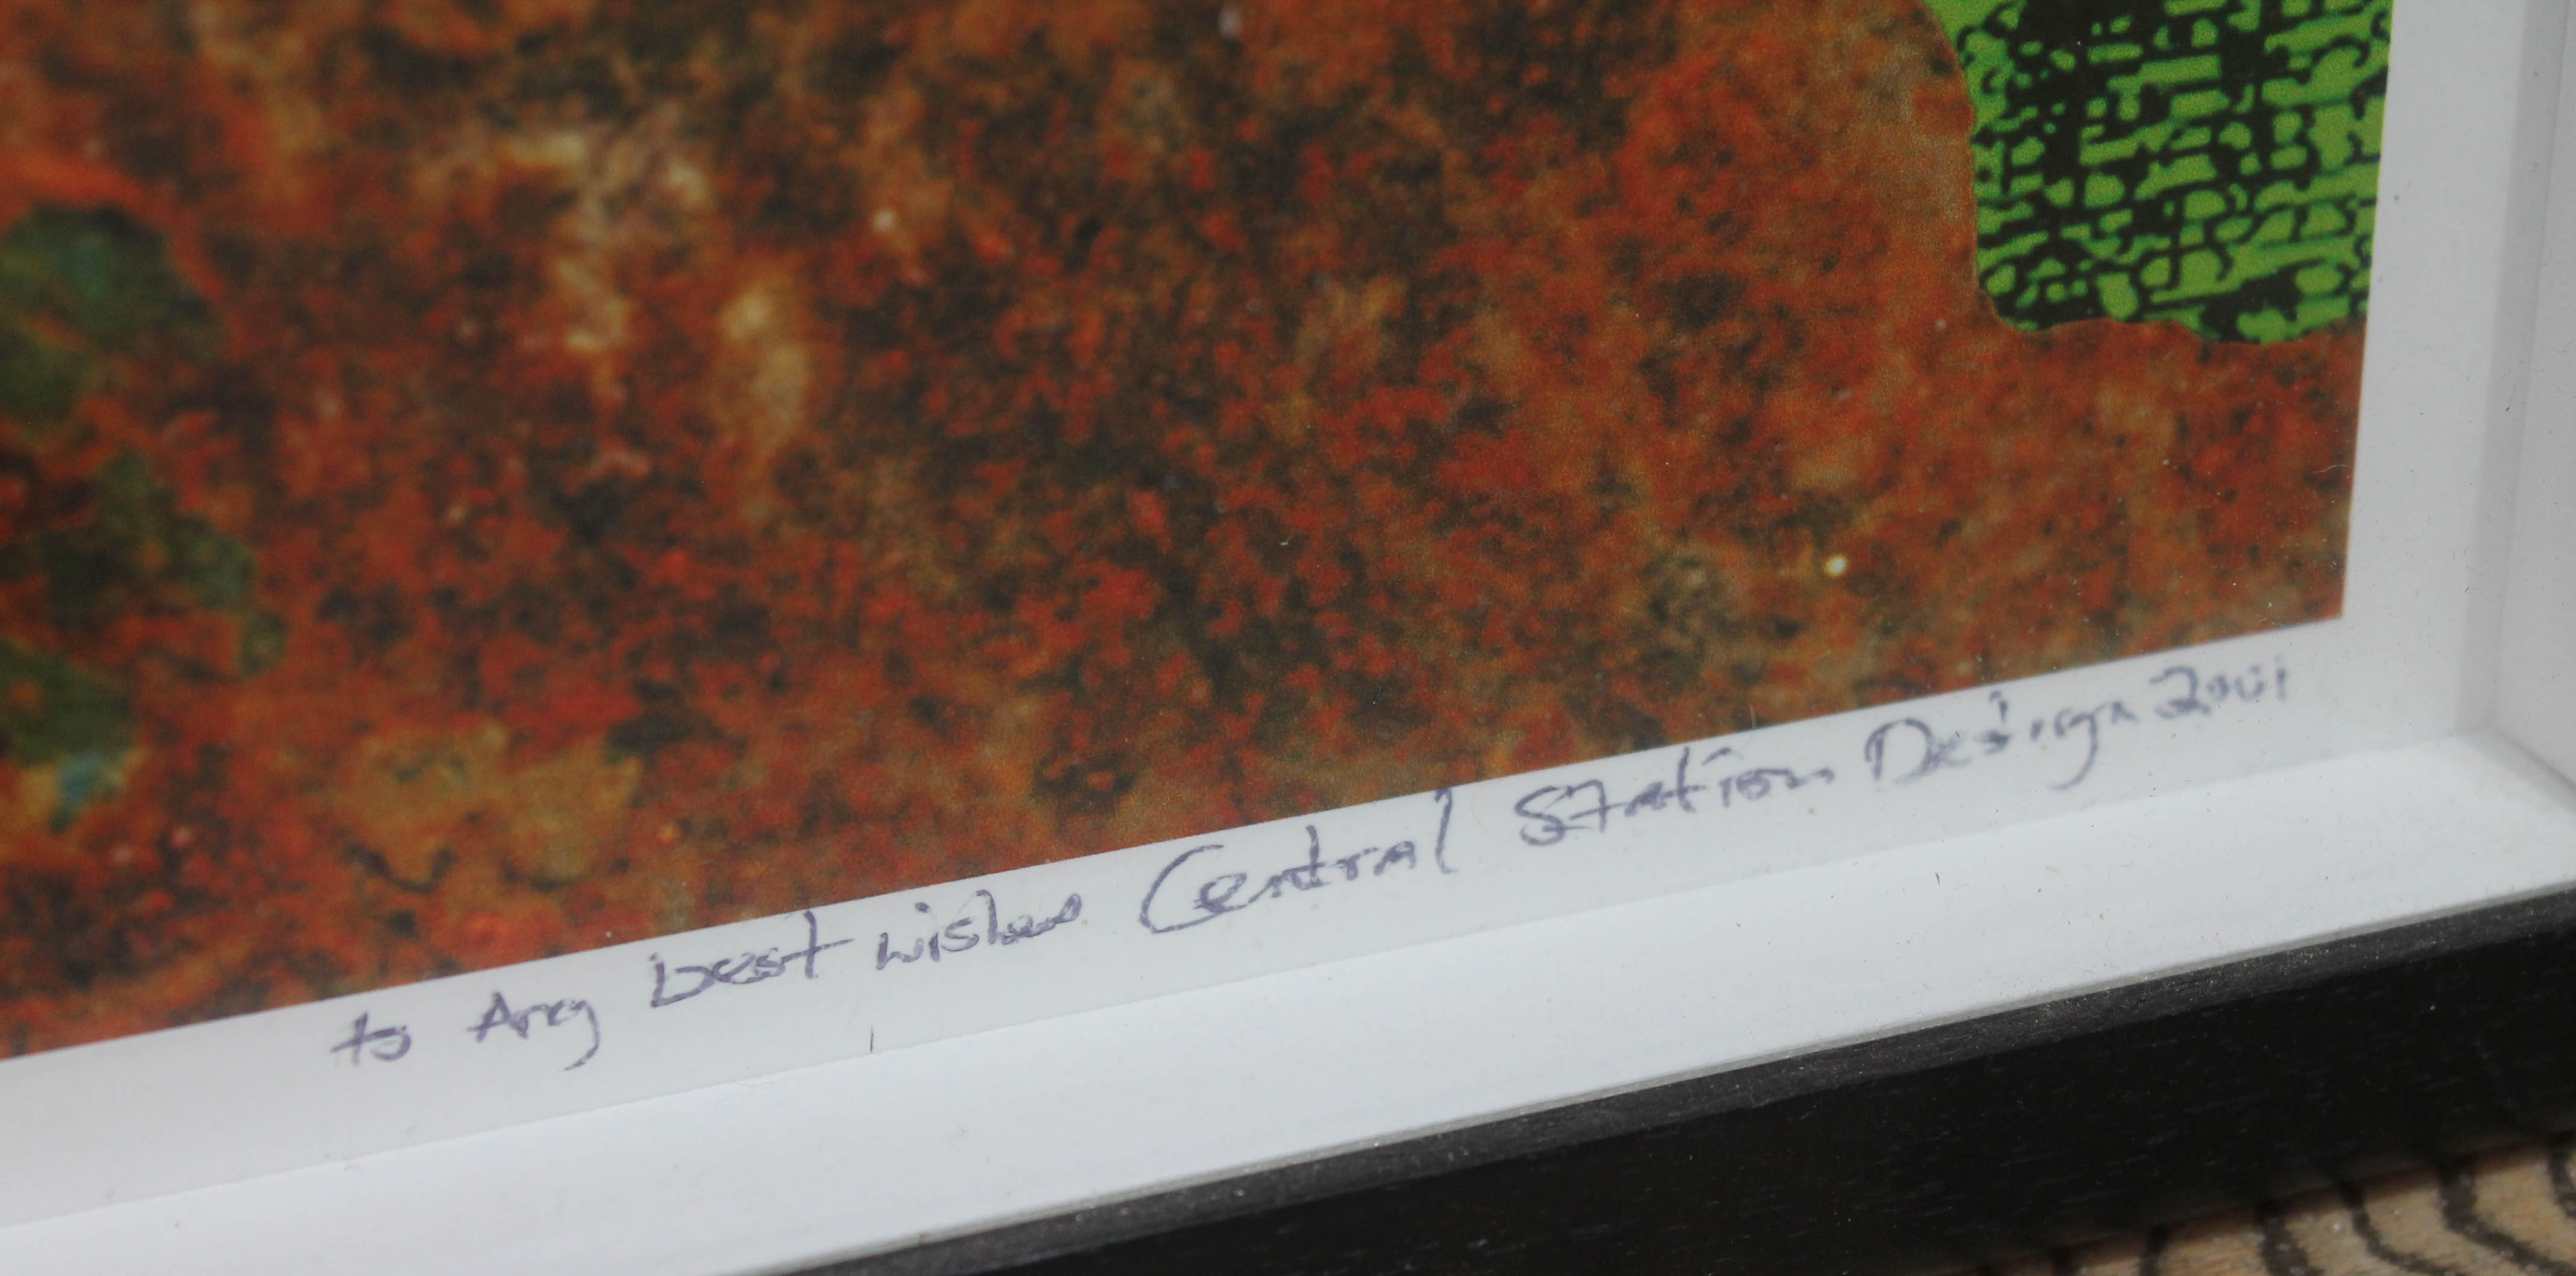 A pair of Central Station Design digital prints, each inscribed 'To Ang Best Wishes Central - Bild 3 aus 4